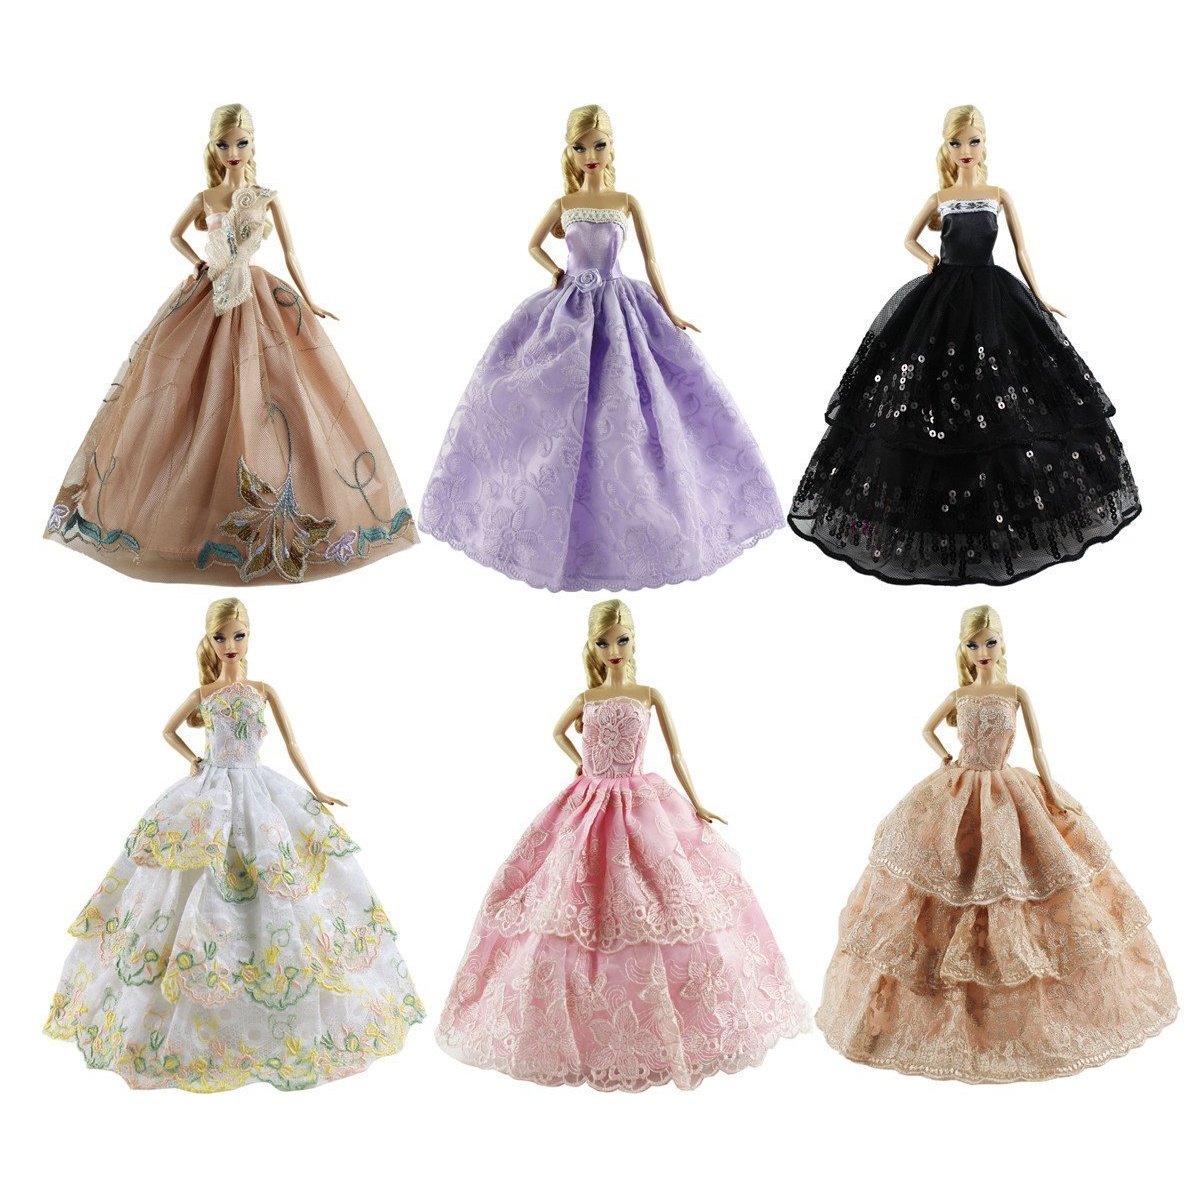 ZITA ELEMENT 6 PCS Fashion Handmade Wedding Party Dress Gown for Barbie Doll XMAS Gift - Random Style Outfits